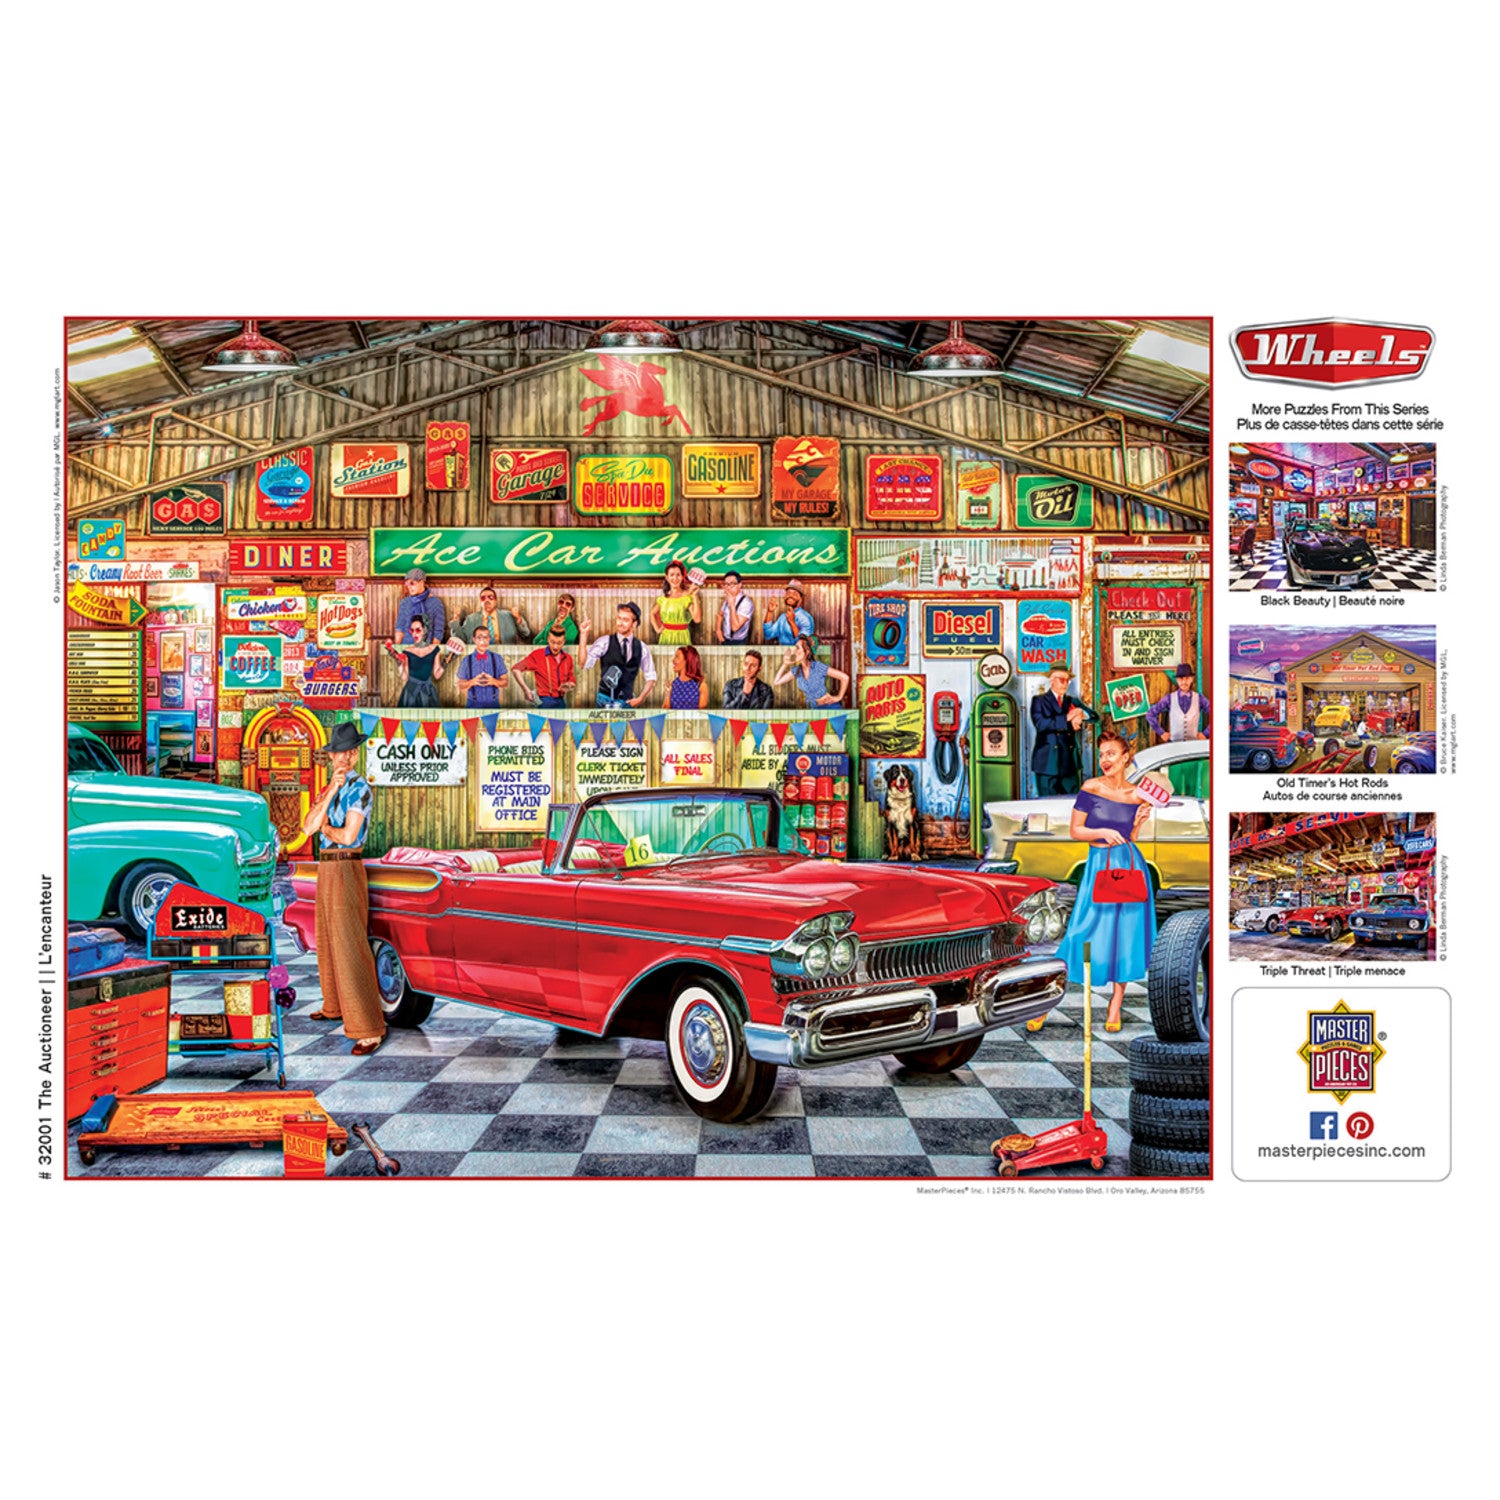 Wheels - The Auctioneer 750 Piece Puzzle